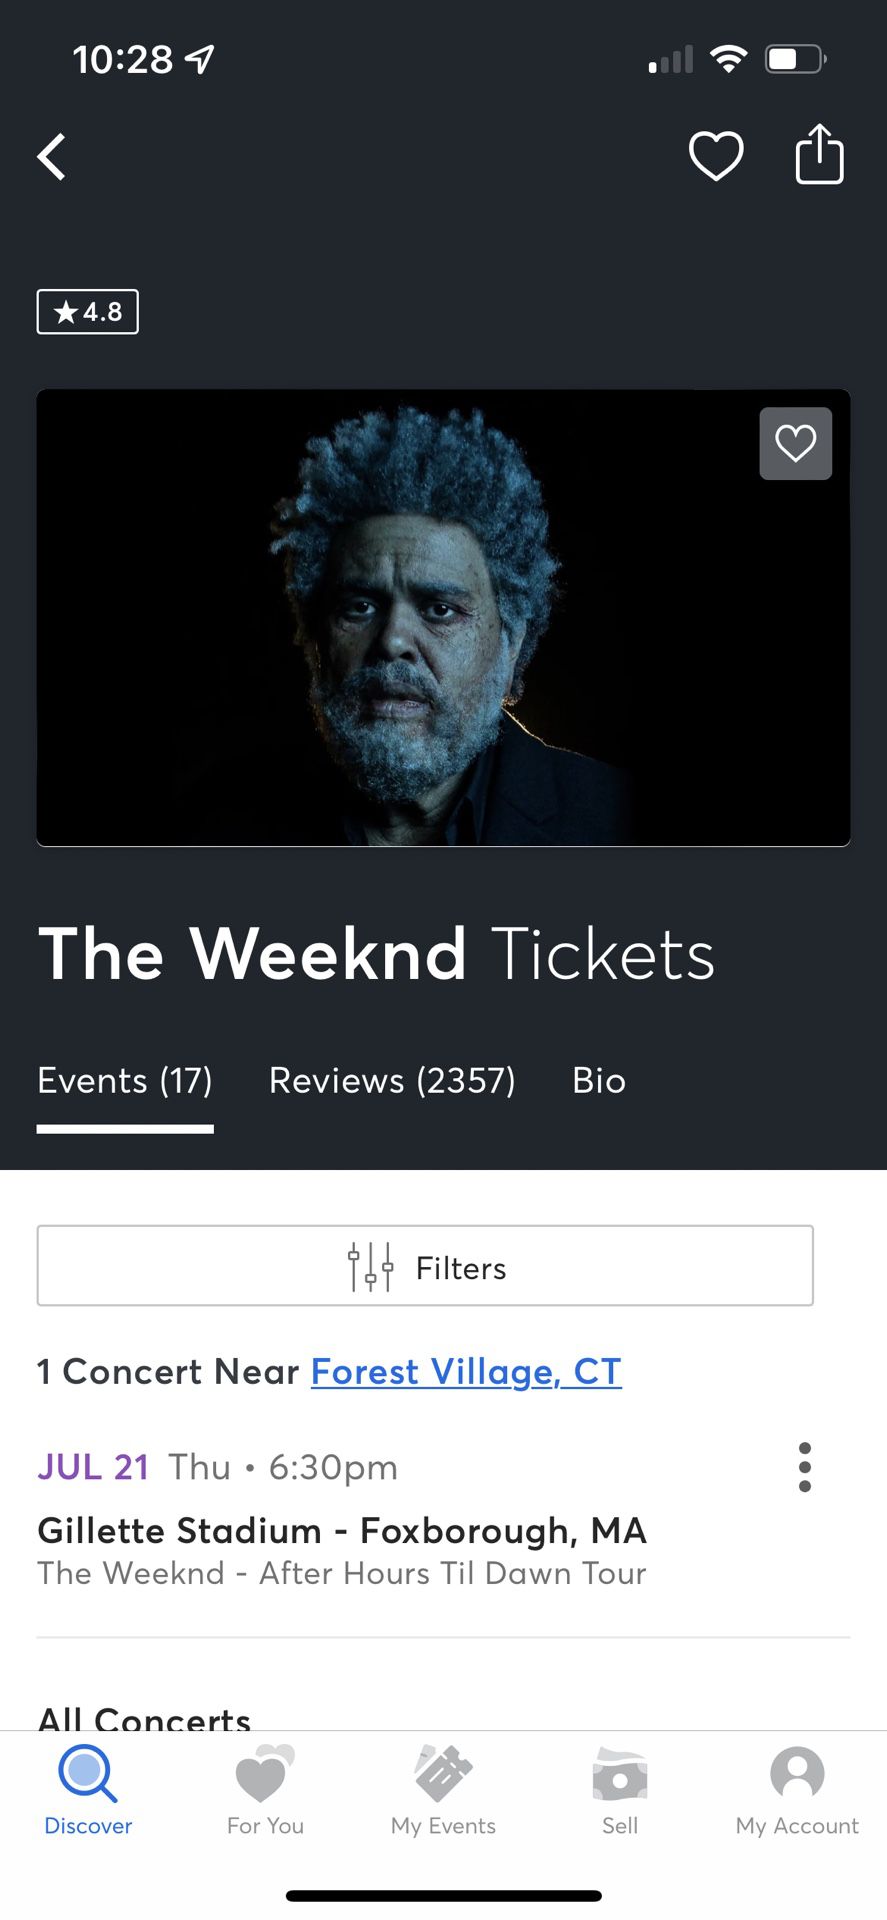 Concert tickets-The Weeknd - After Hours Til Dawn Tour 